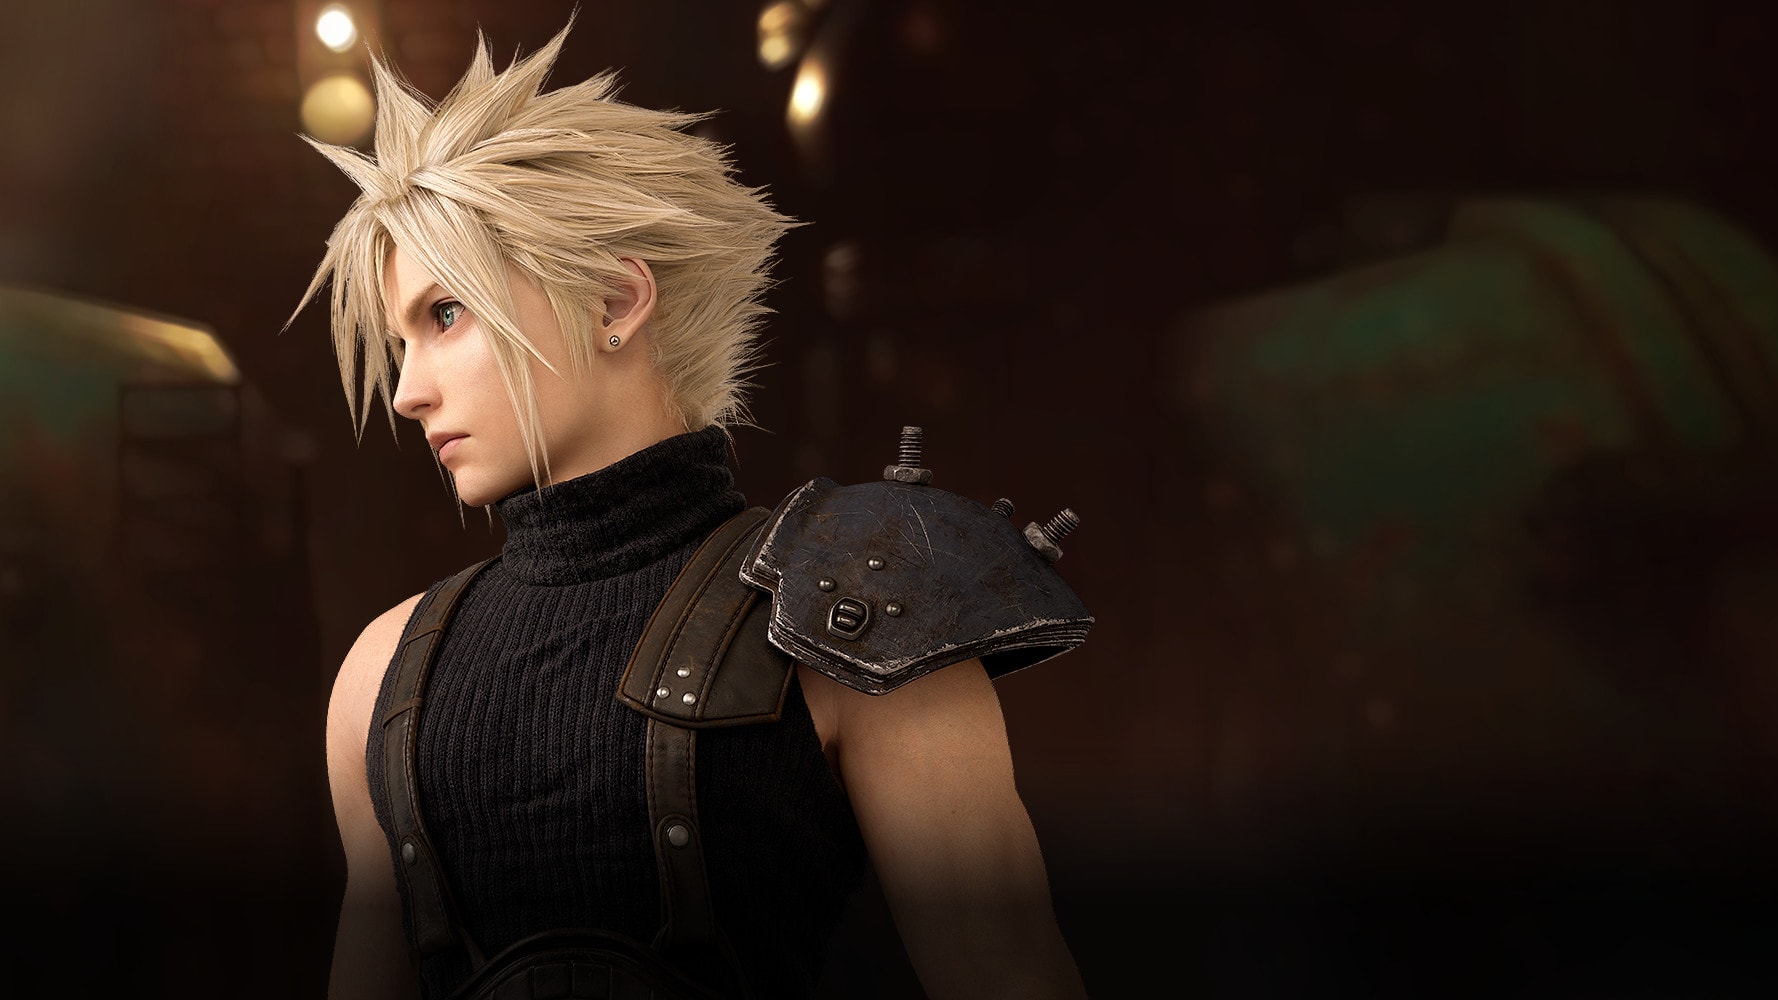 Final Fantasy VII Remake: How to Get Blue Hair for Cloud Strife - wide 10